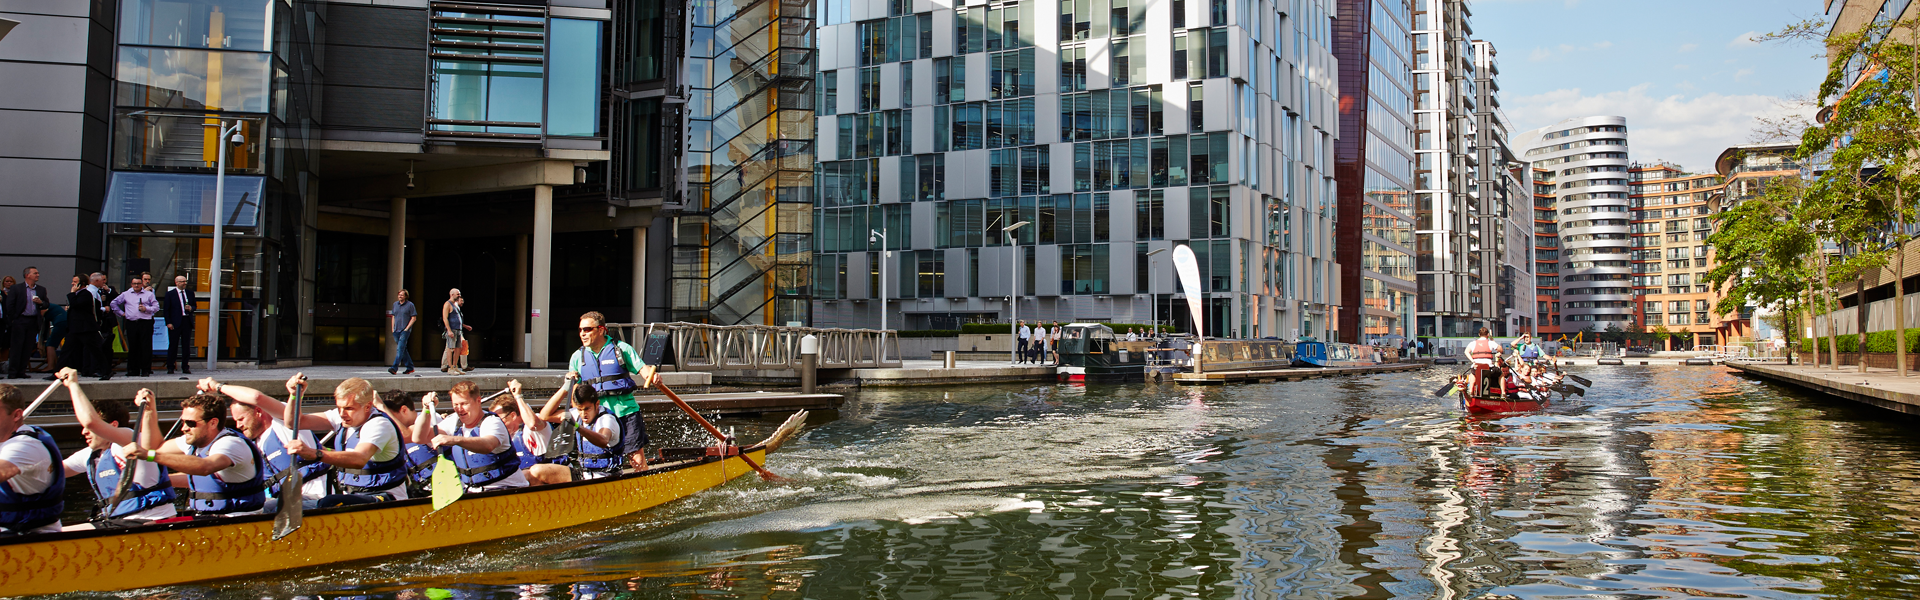 Canal at Imperial Wharf